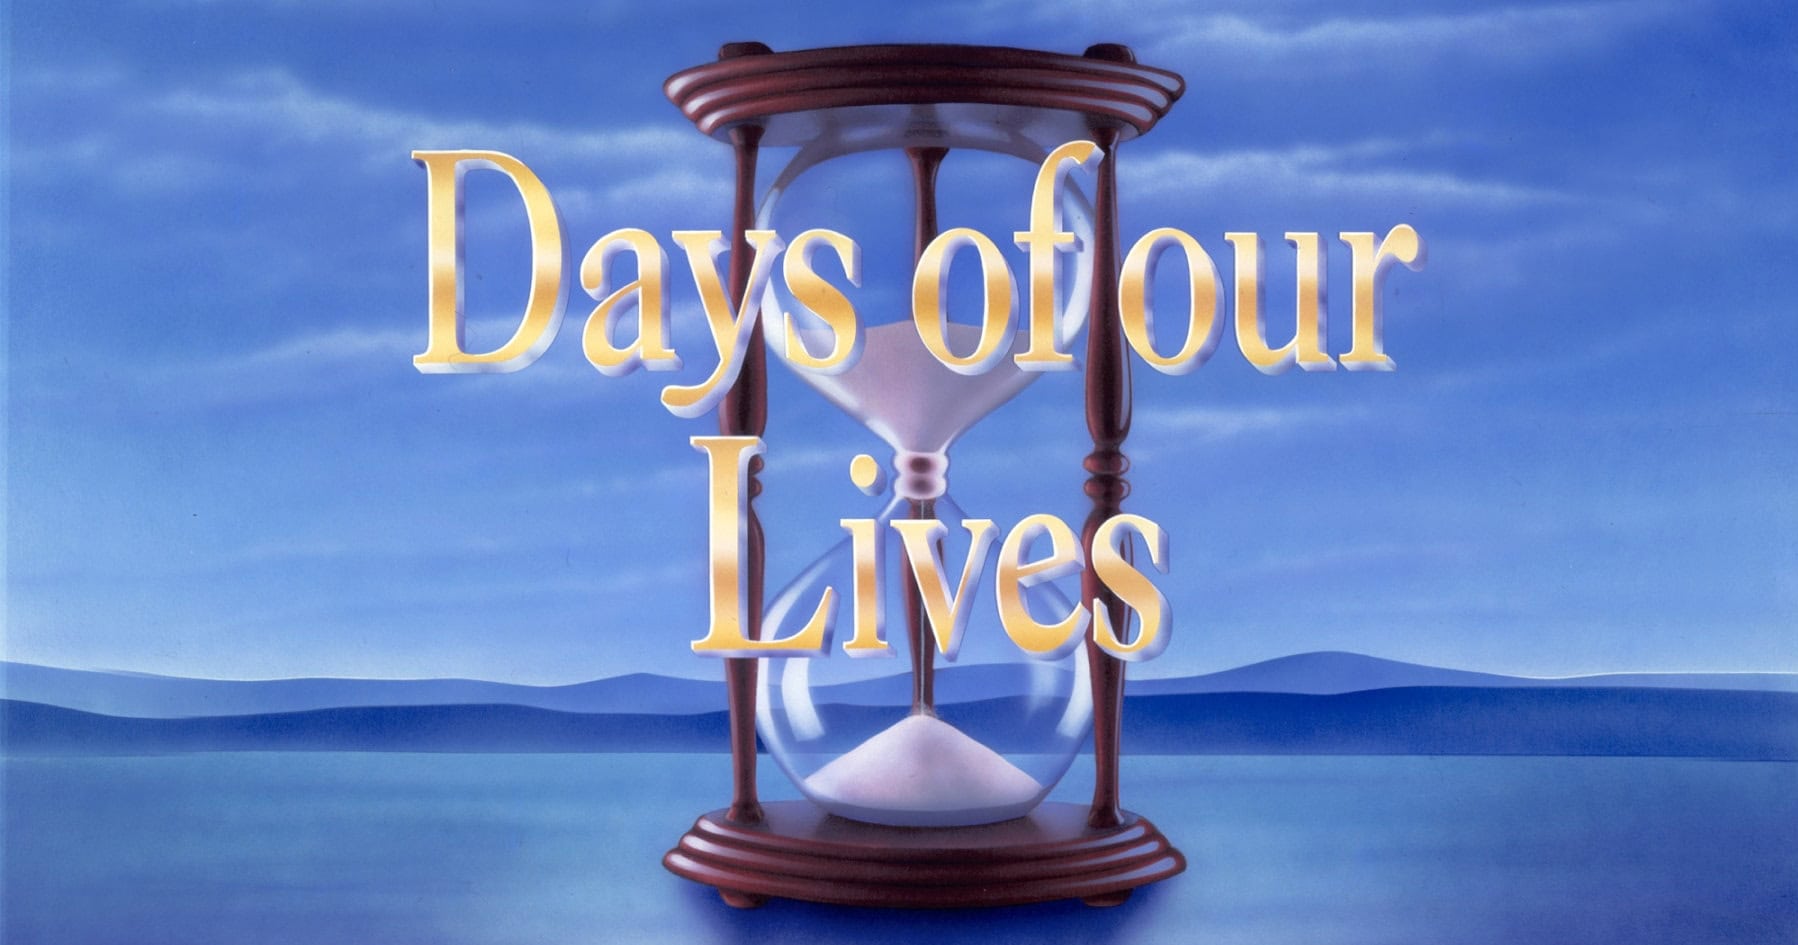 Days of Our Lives Welcomes Back Ron Carlivati’s Episodes on May 31